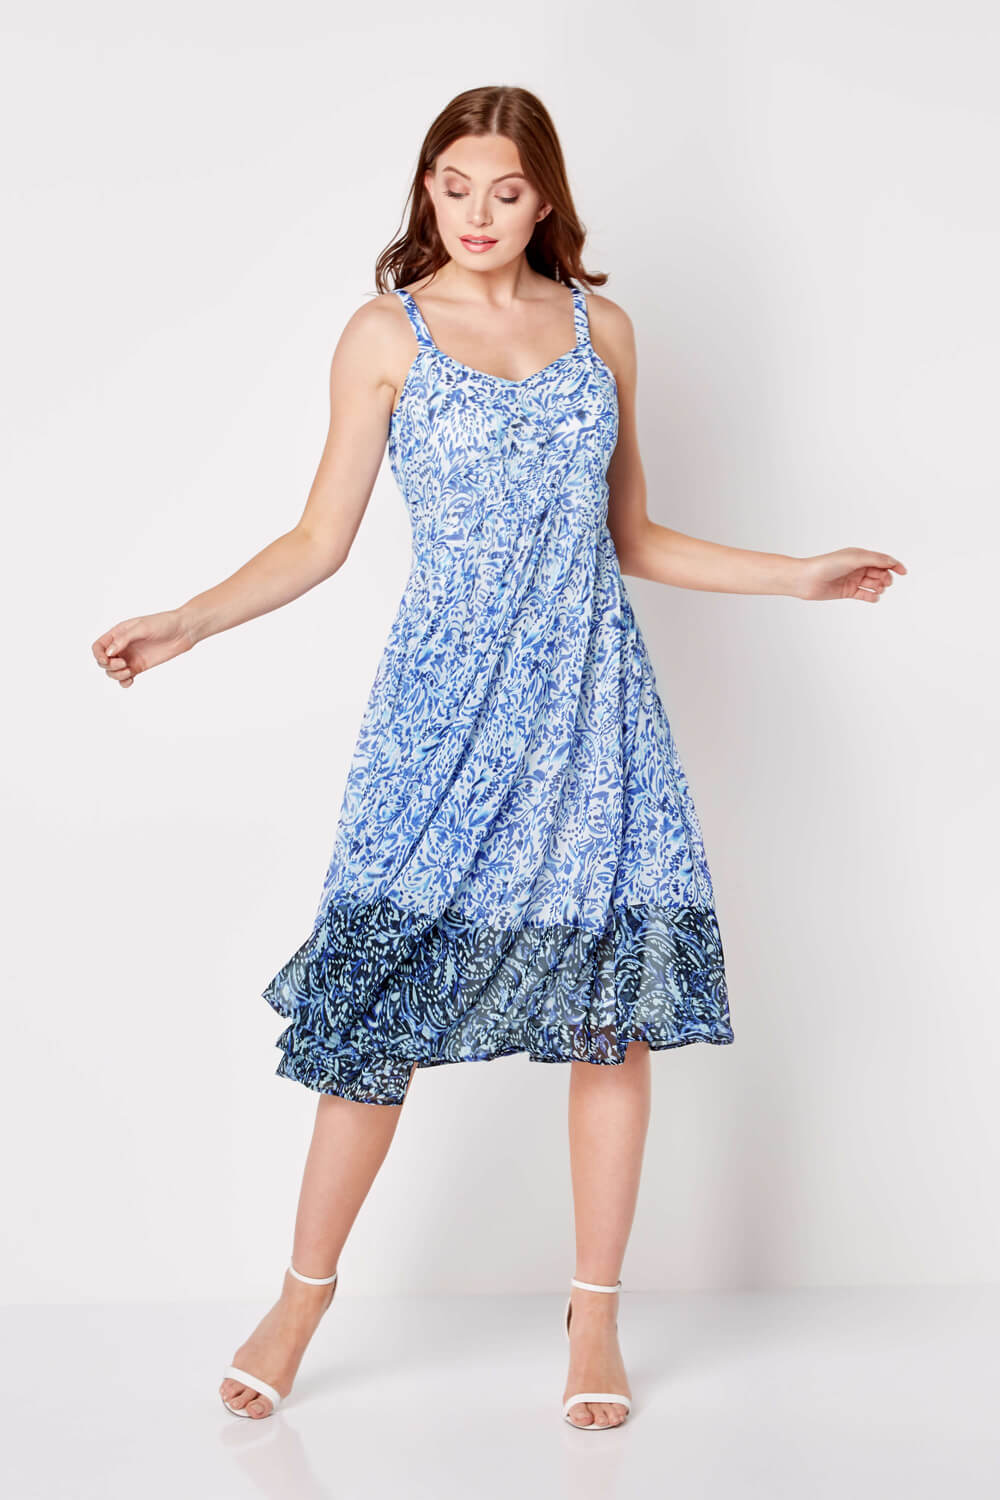 Paisley Print Fit and Flare Dress in Blue - Roman Originals UK